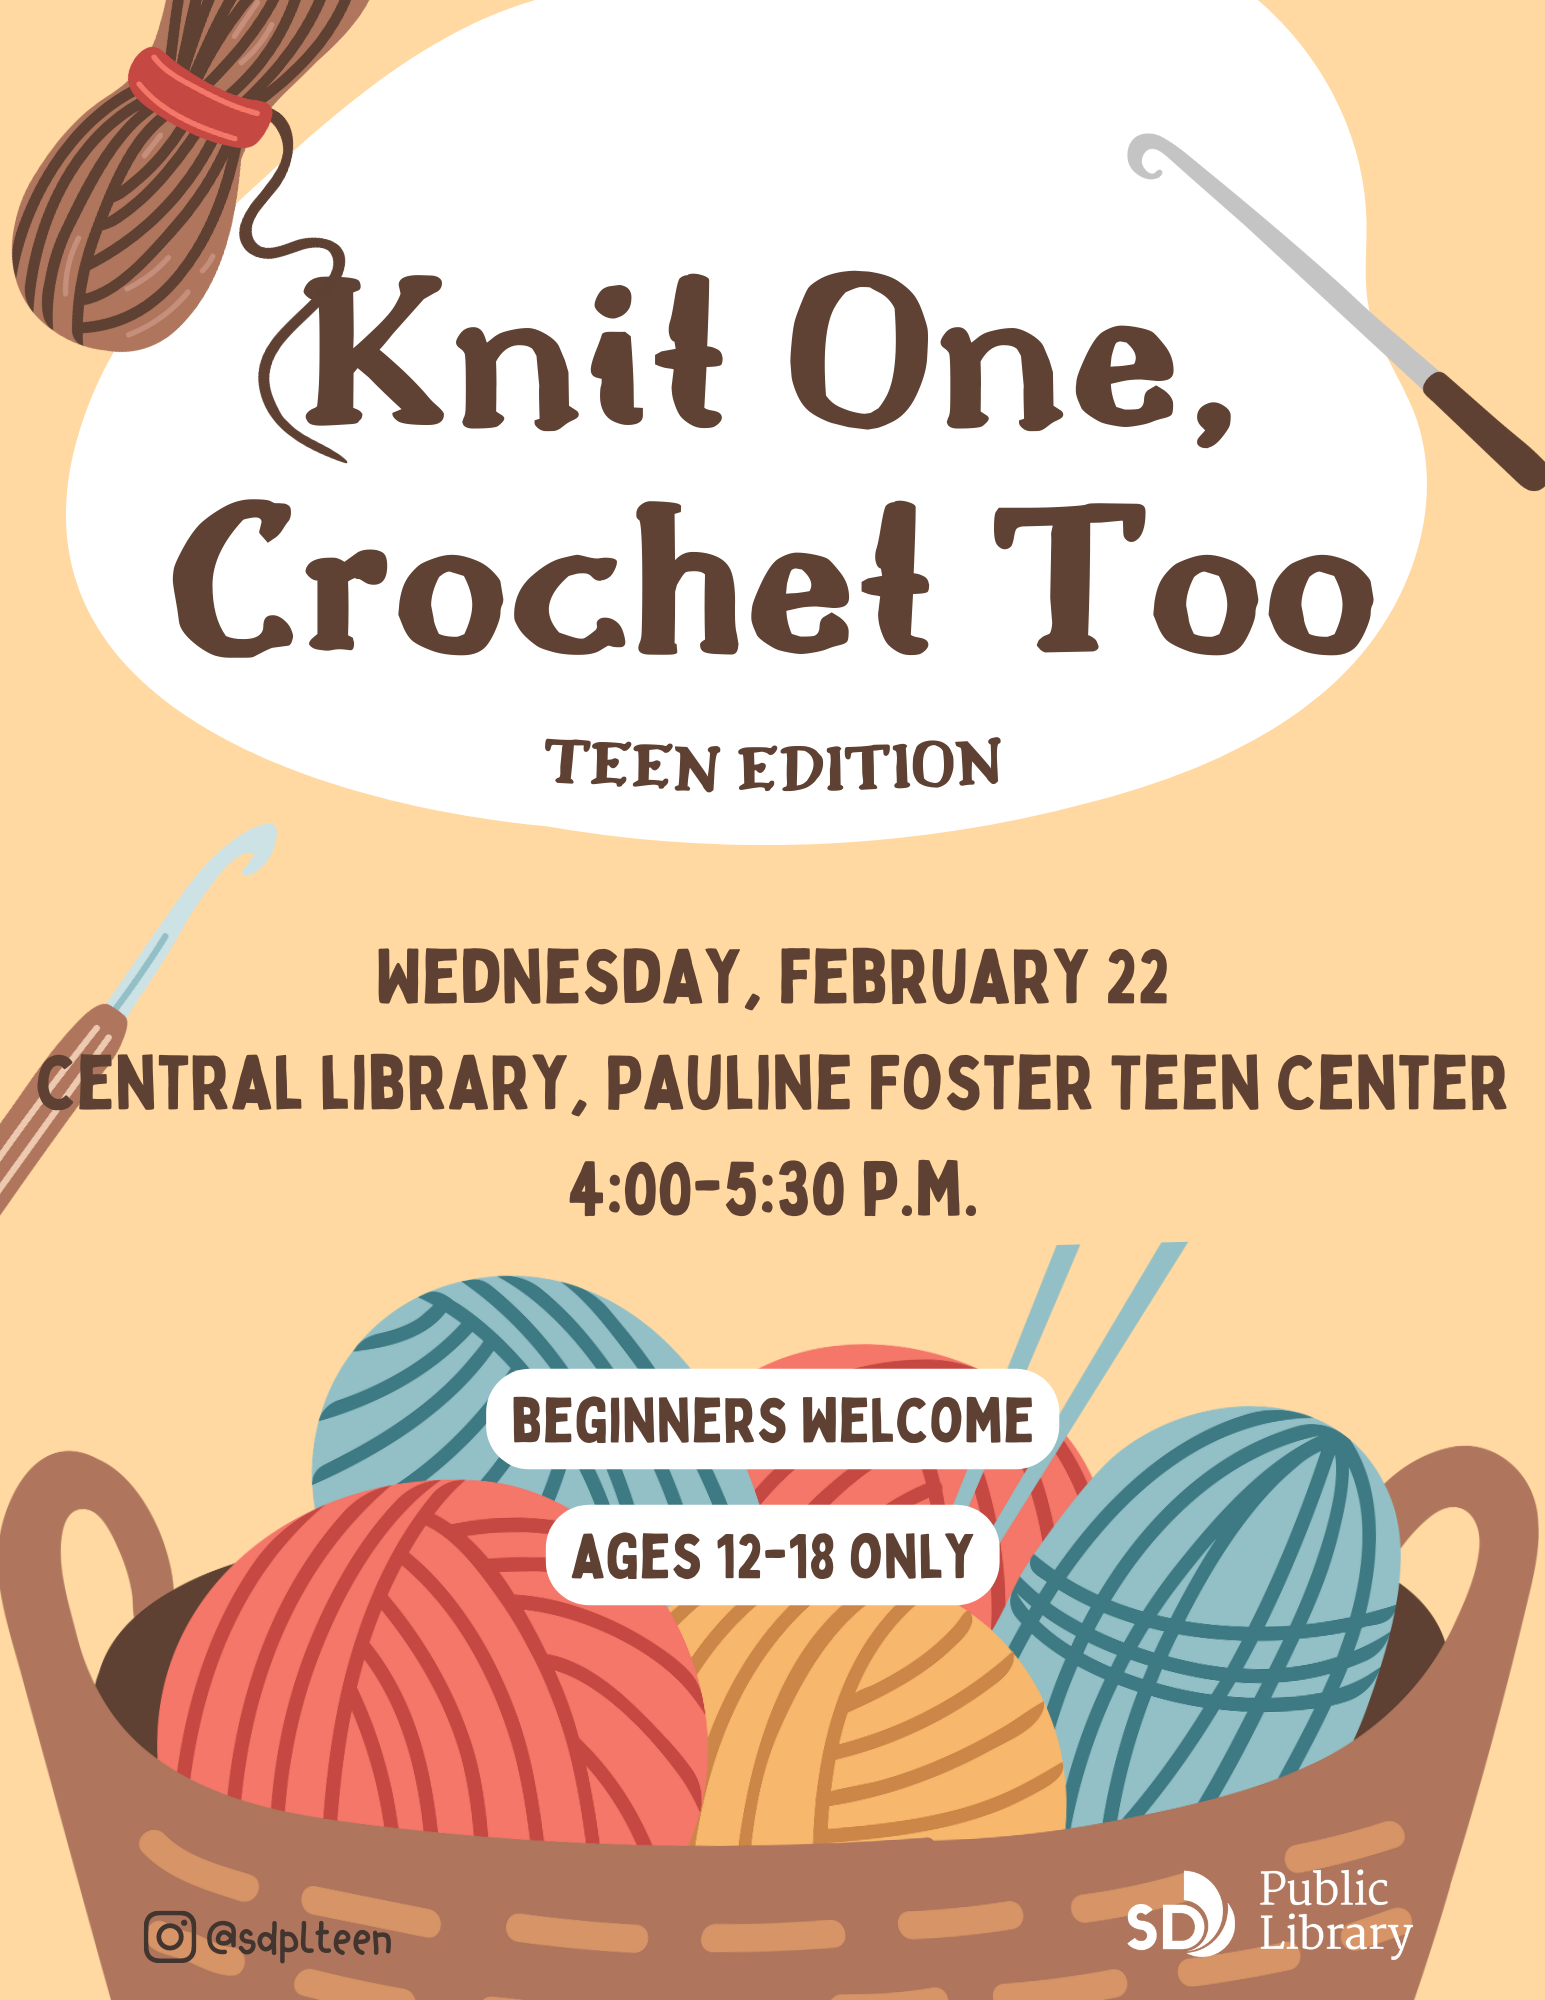 Knit One, Crochet Too (Teen Edition). Wednesday, February 22, Central Library, Pauline Foster Teen Center, 4-5:30pm. Beginners welcome. Ages 12-18 only.